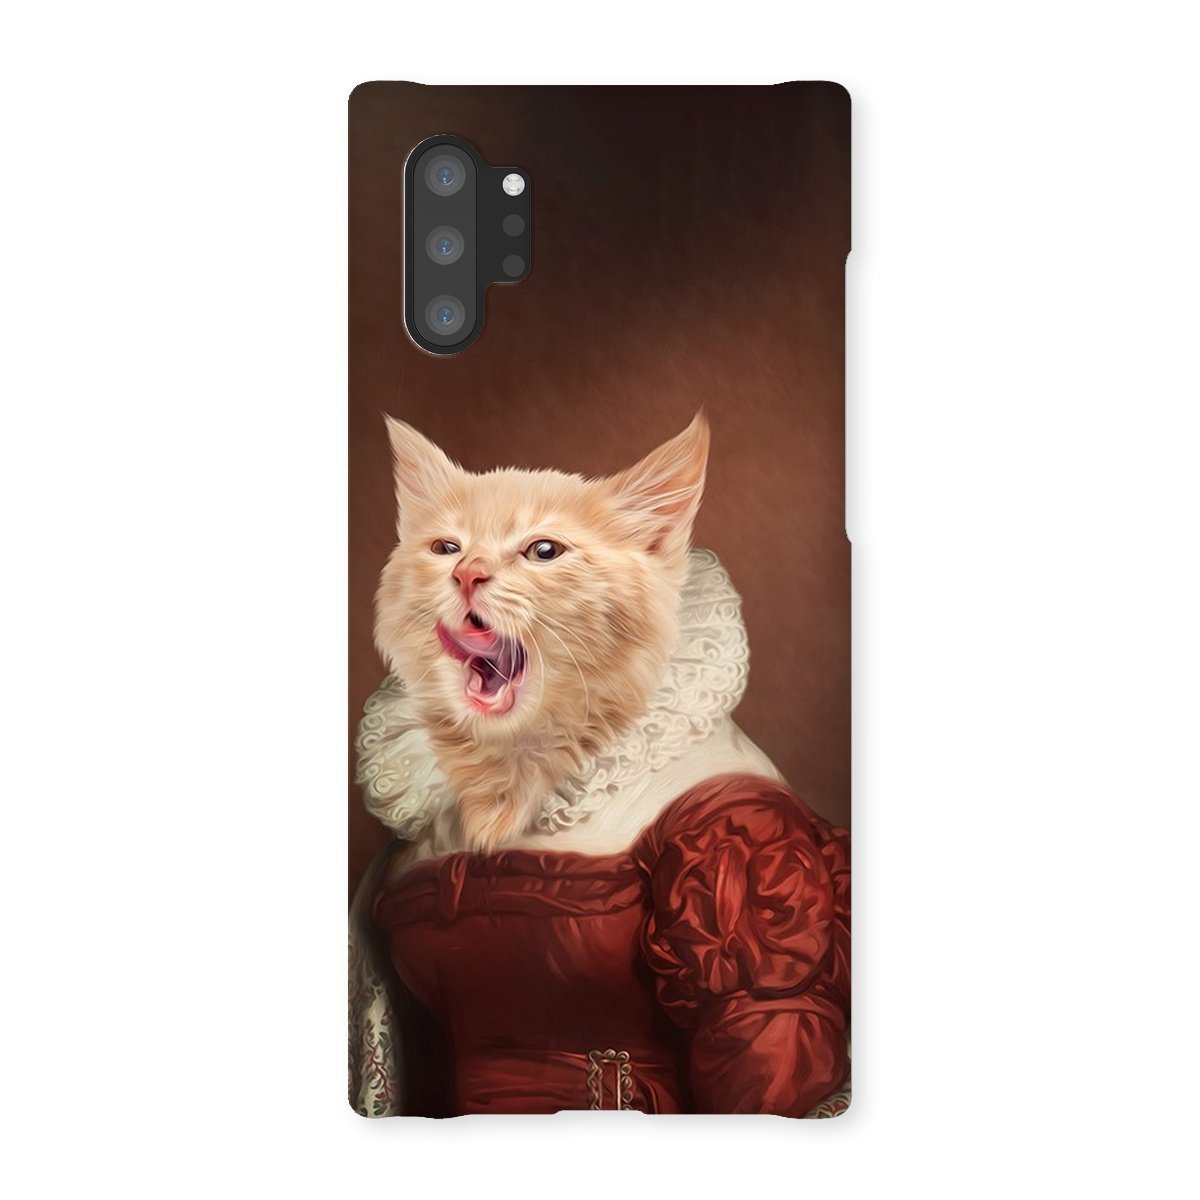 The Countryside Girl: Custom Pet Phone Case - Paw & Glory - paw and glory, pet art phone case uk, personalized dog phone case, life is better with a dog phone case, personalised dog phone case, pet portrait phone case uk, phone case dog, Pet Portrait phone case,